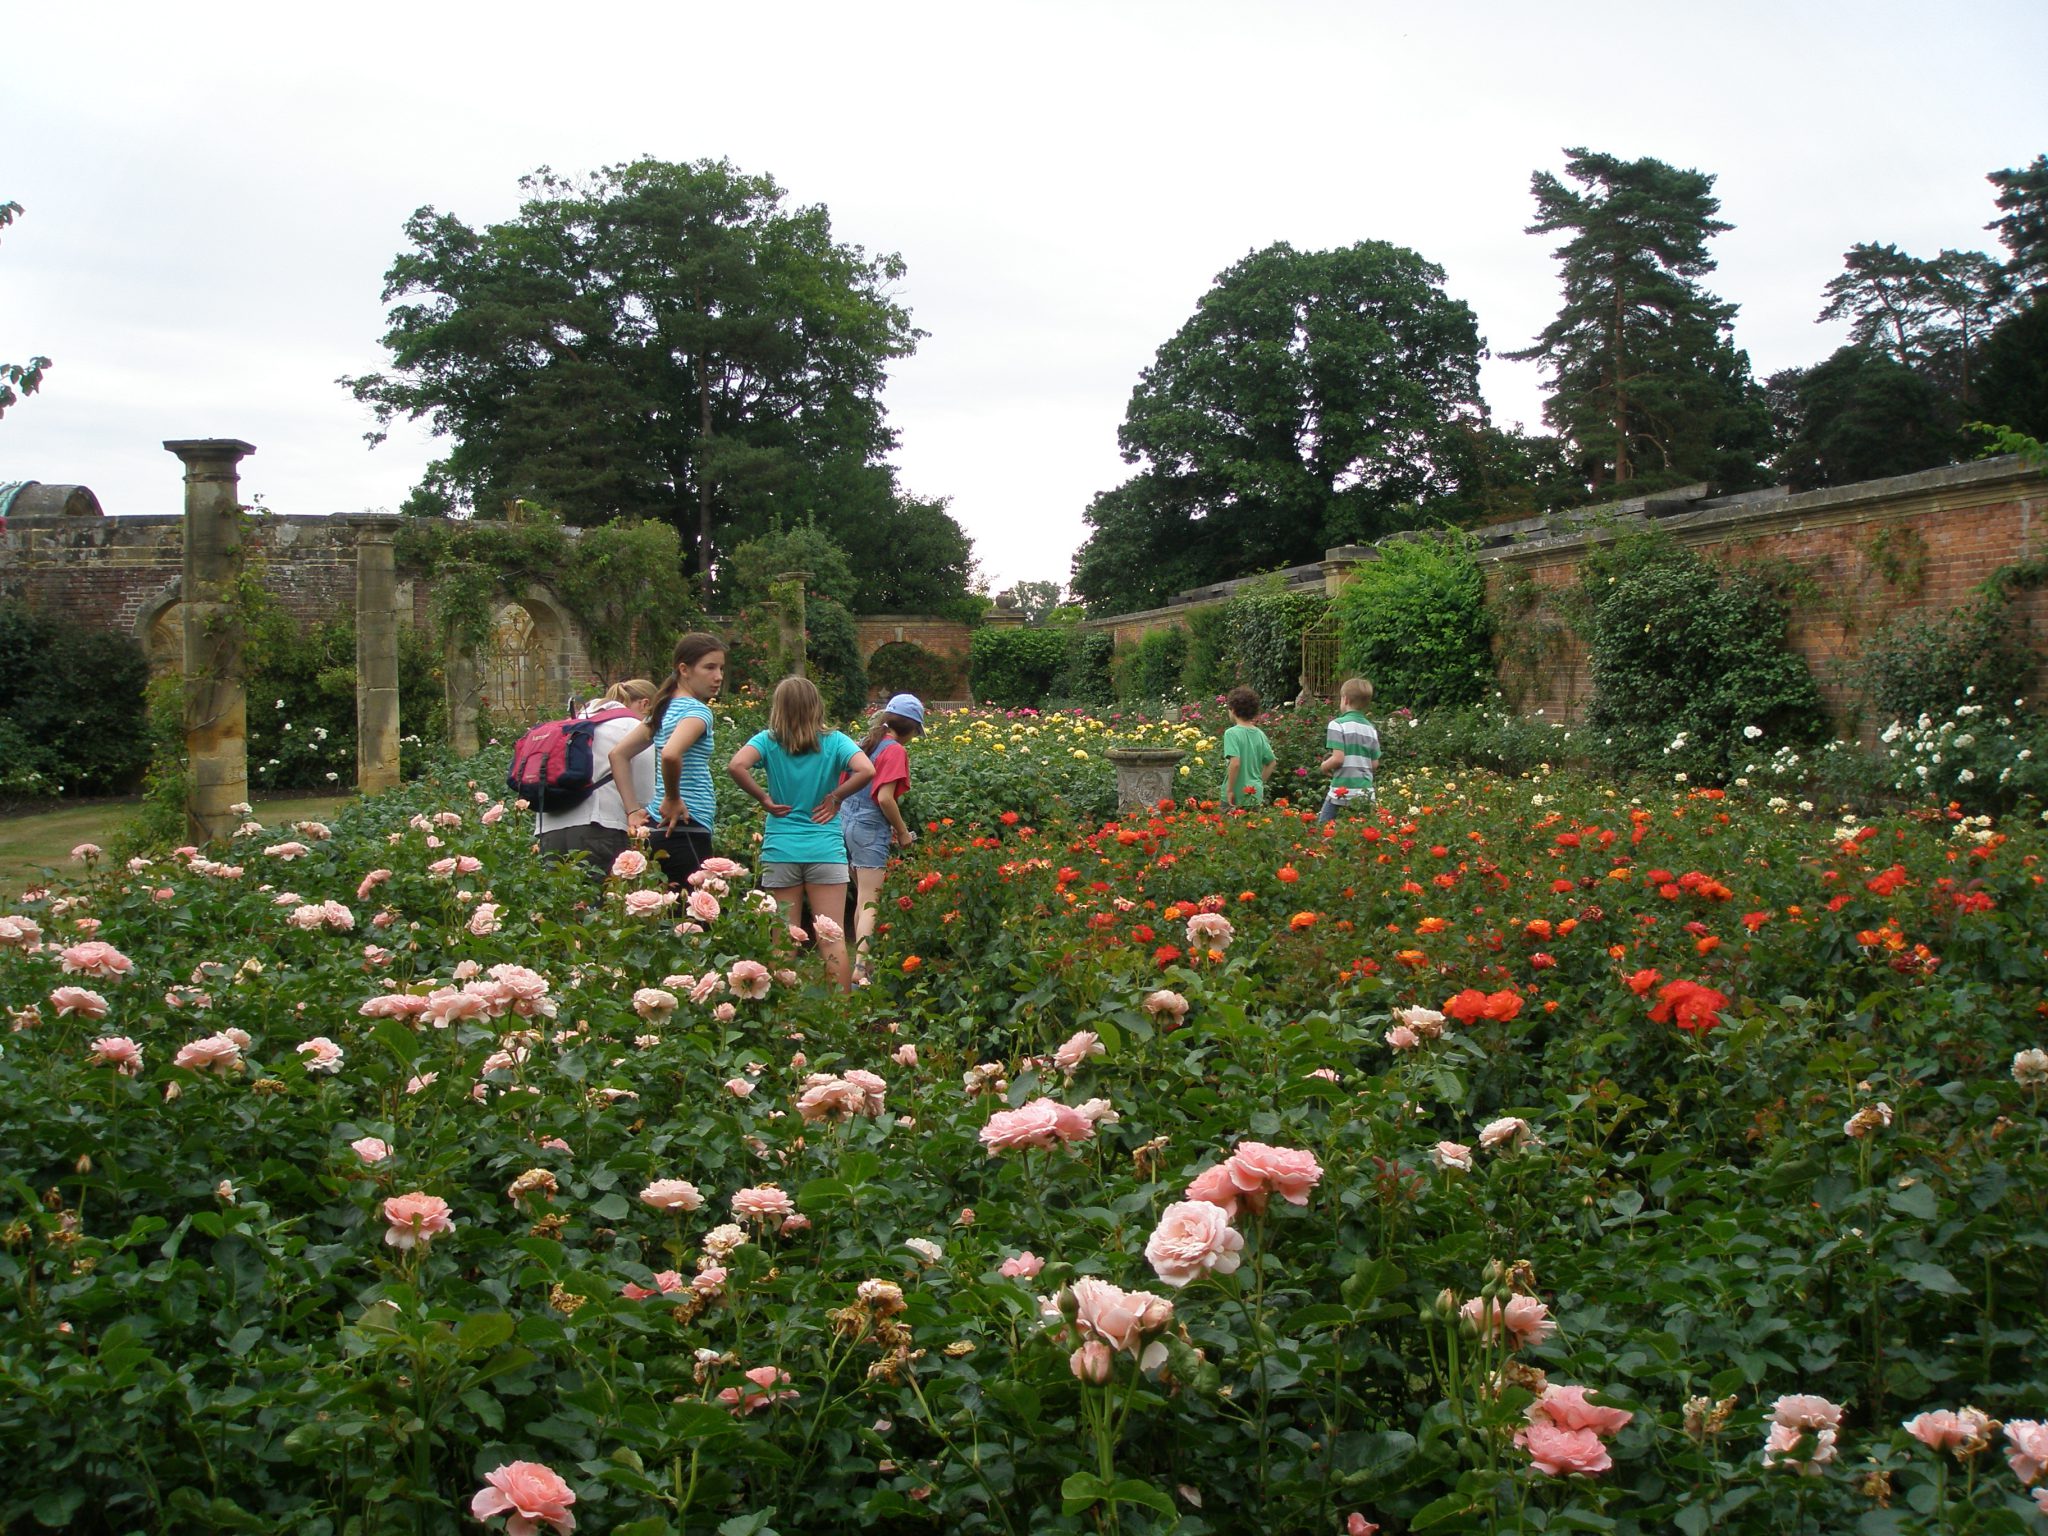 Astor's Rose Gardens contain over 4000 bushes...in a for a penny, in for a pound.